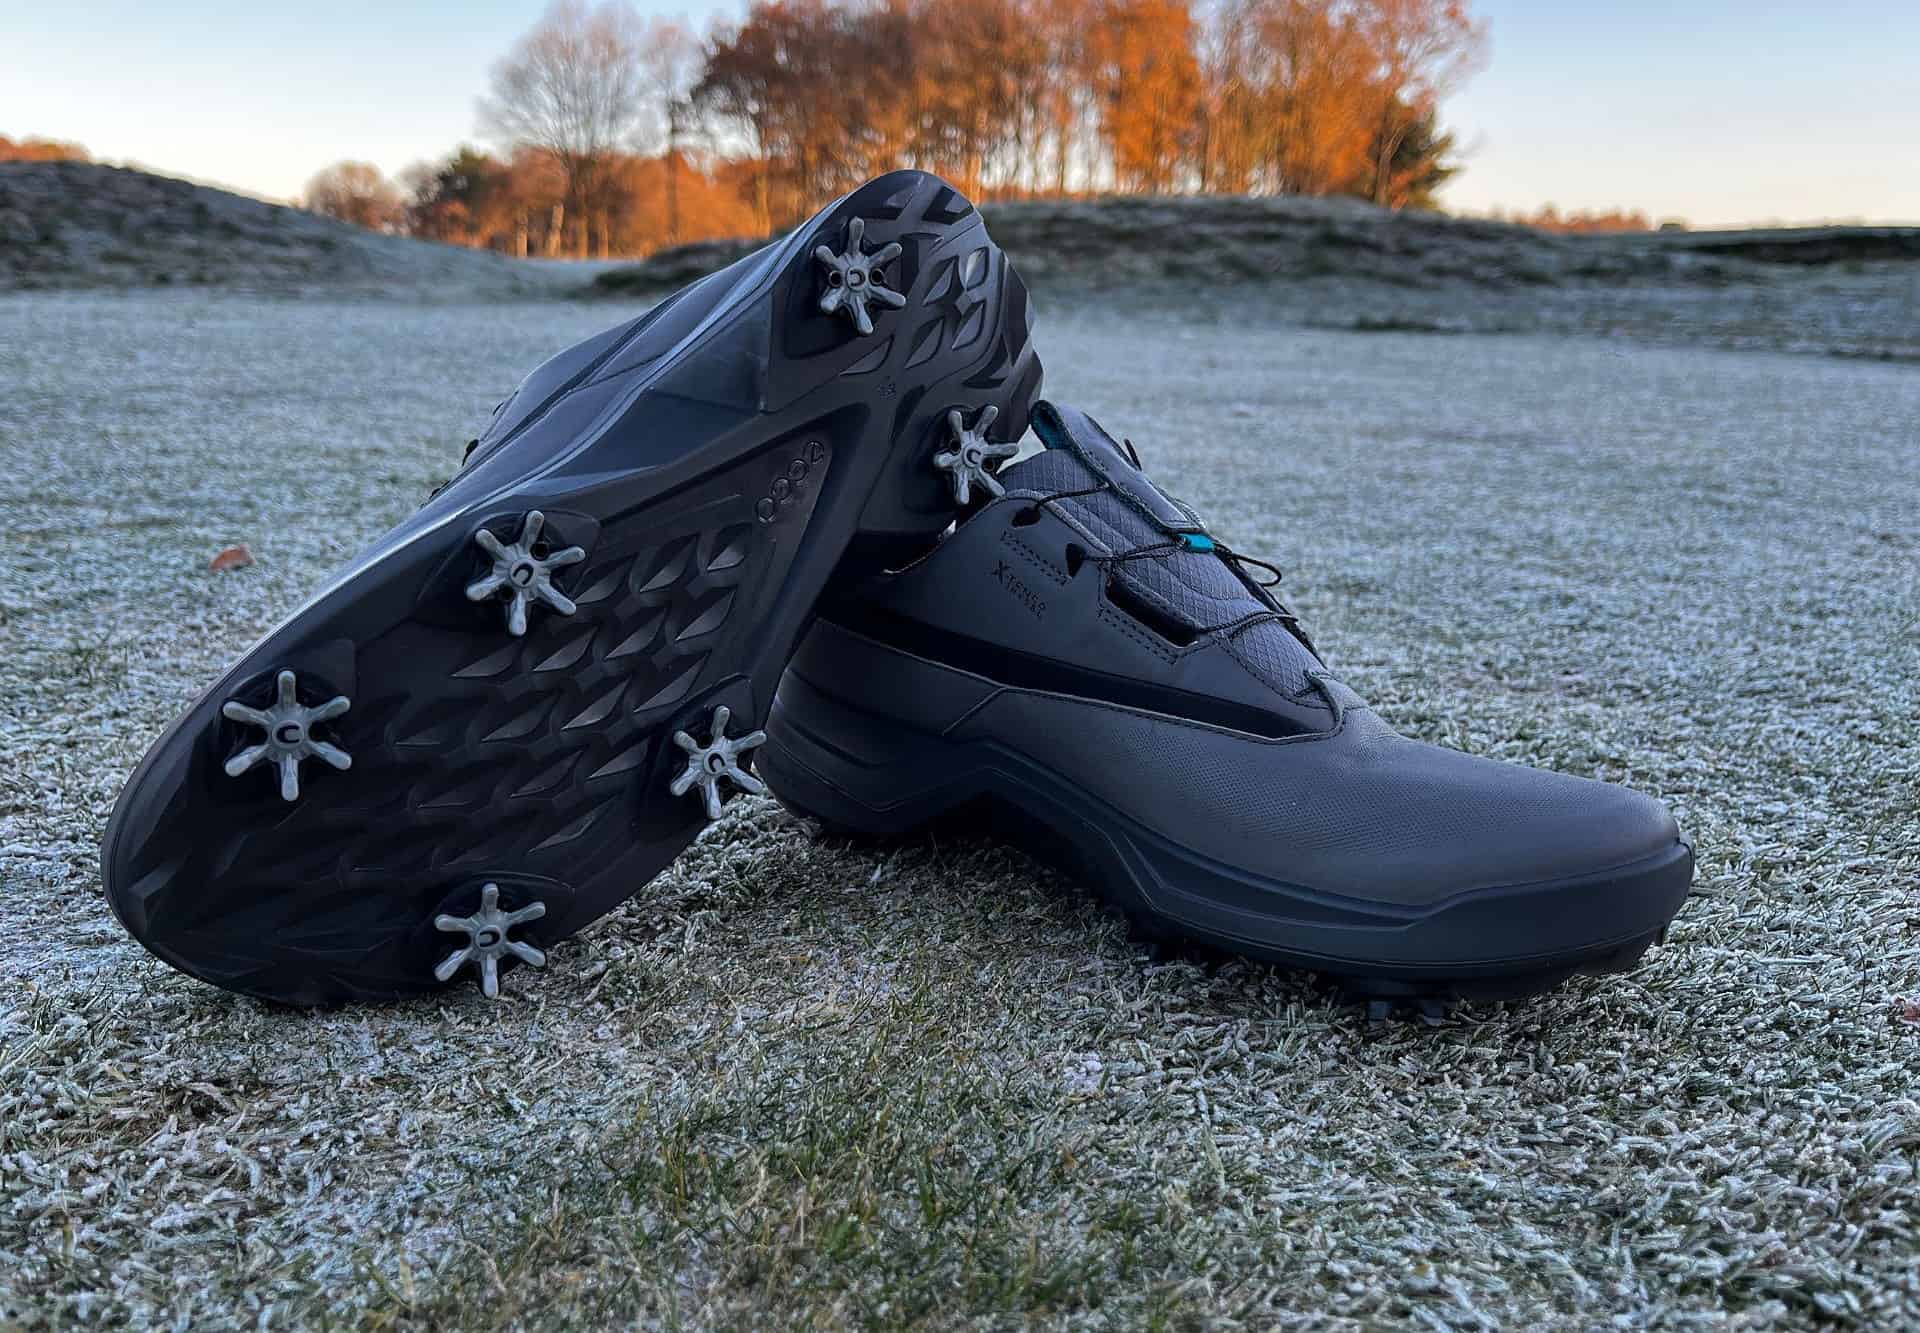 Ecco Biom G5 Review: Is it Worth Buying a Spiked Ecco Shoe?